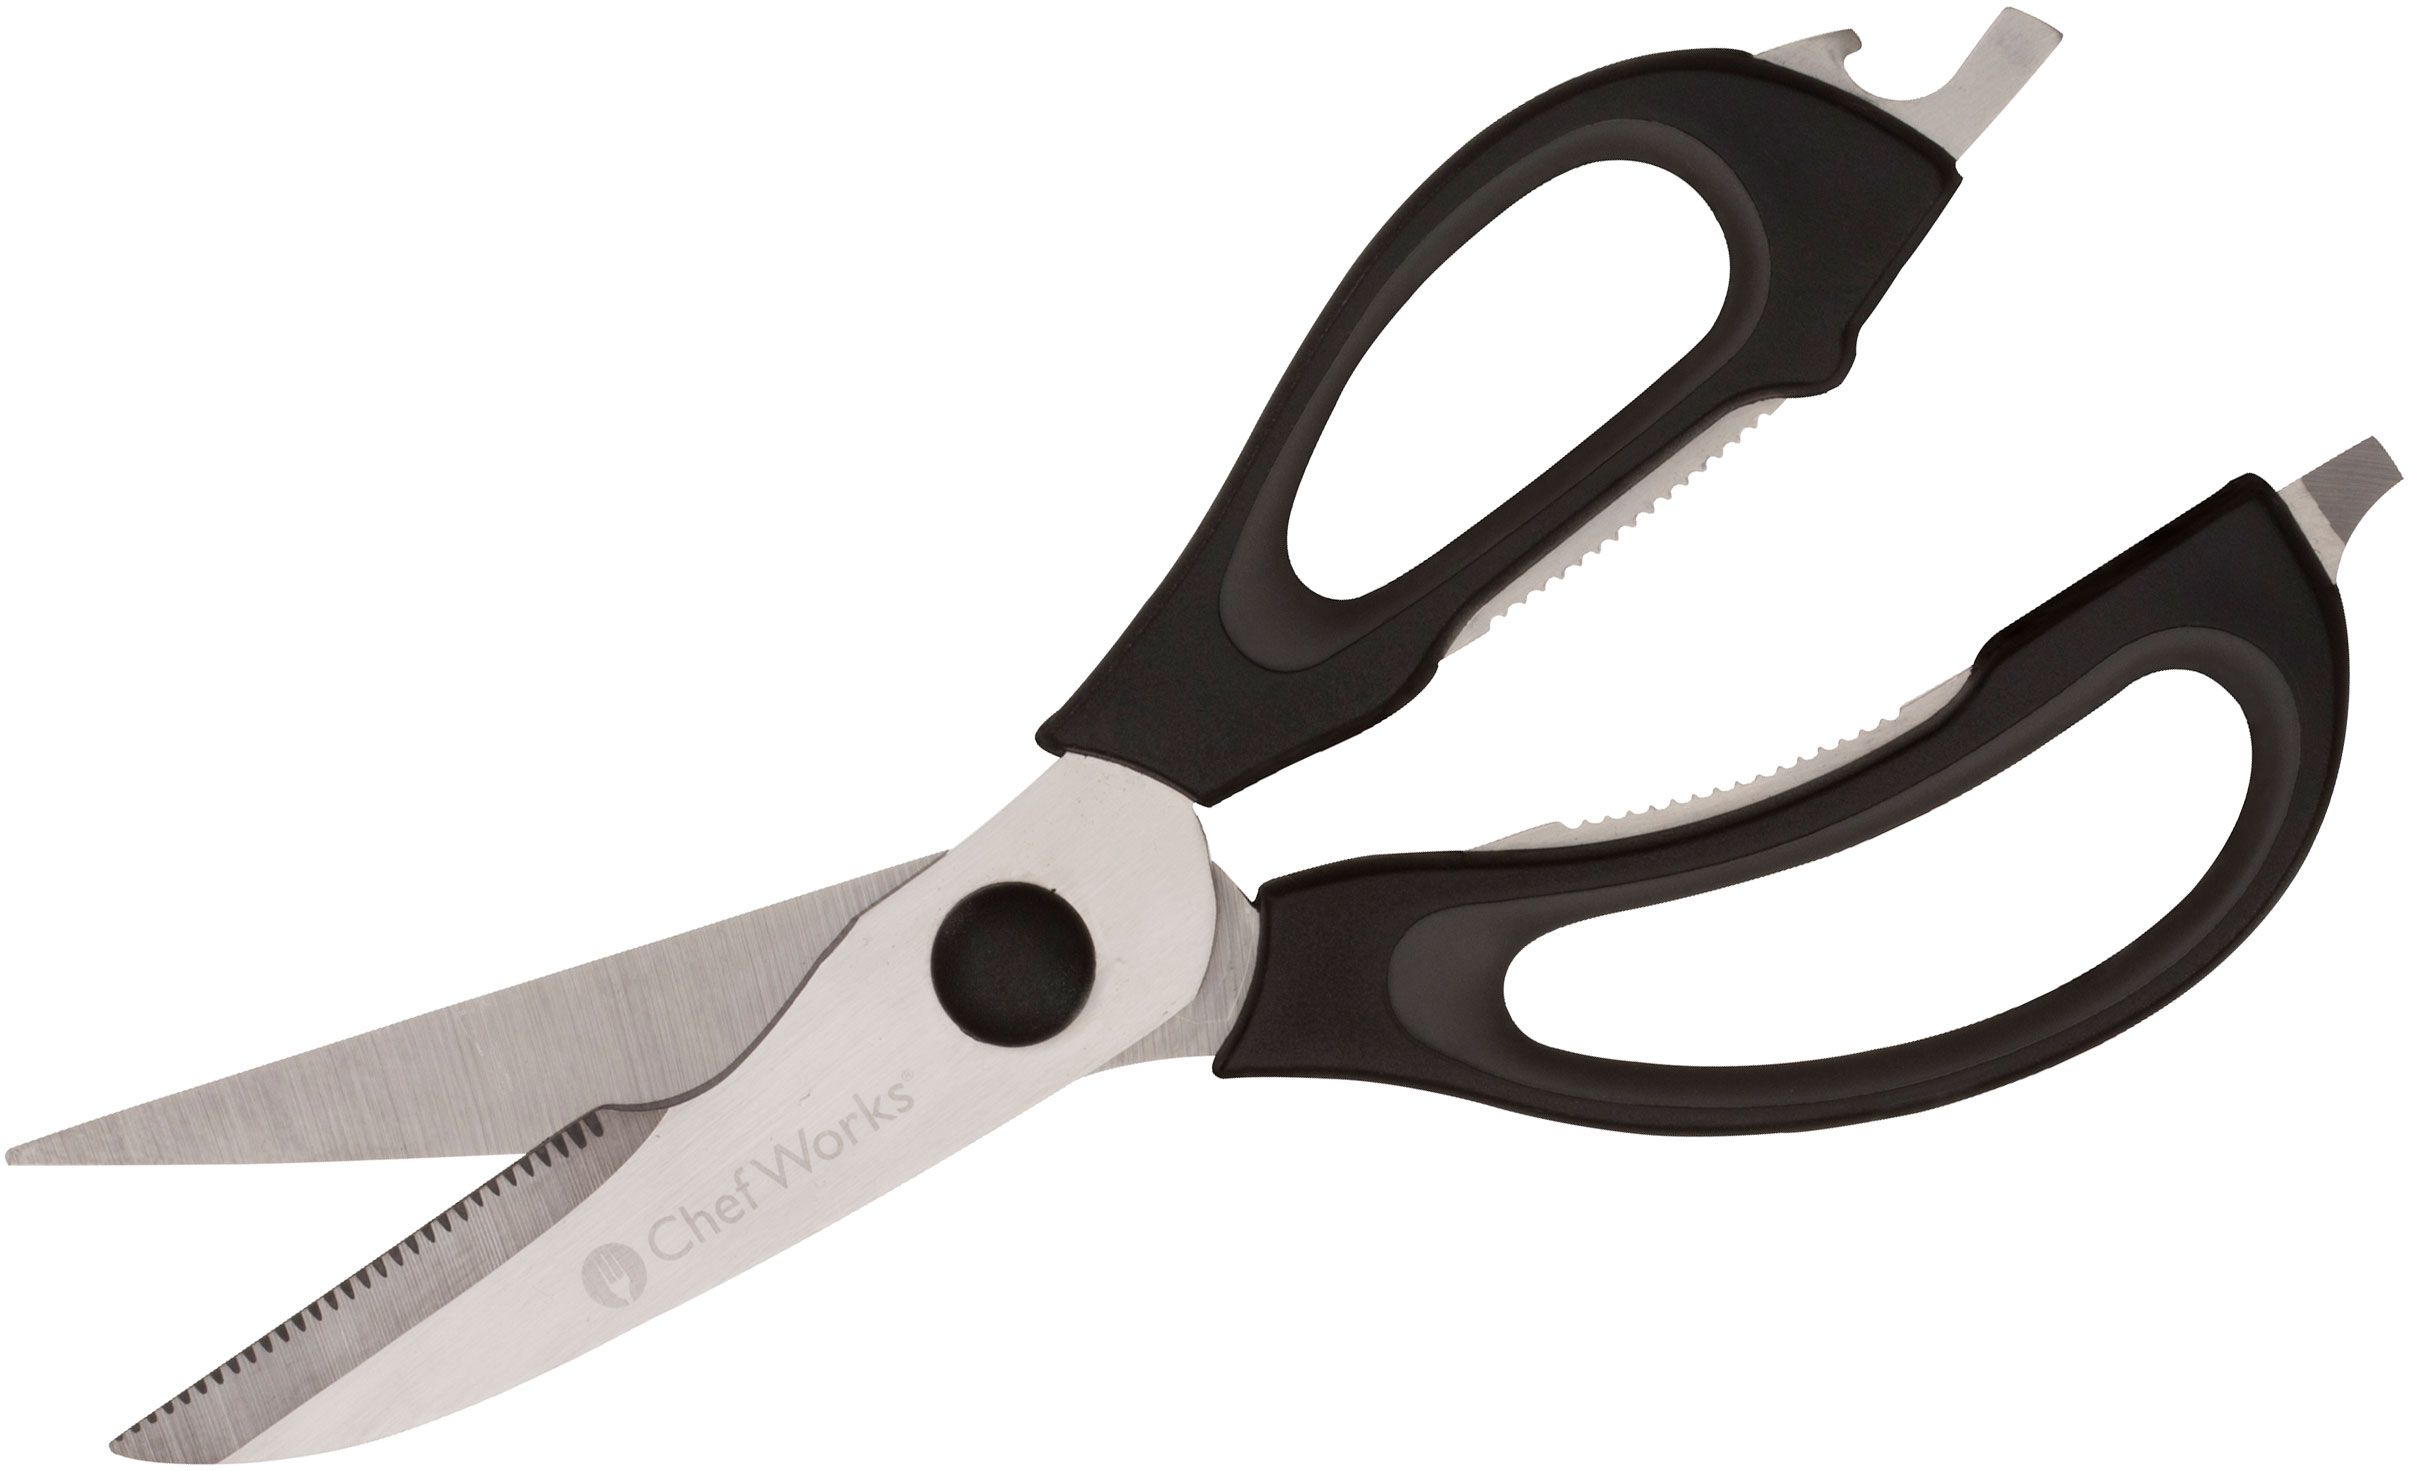 Victorinox Forschner All-Purpose Kitchen Shears with Bottle Opener